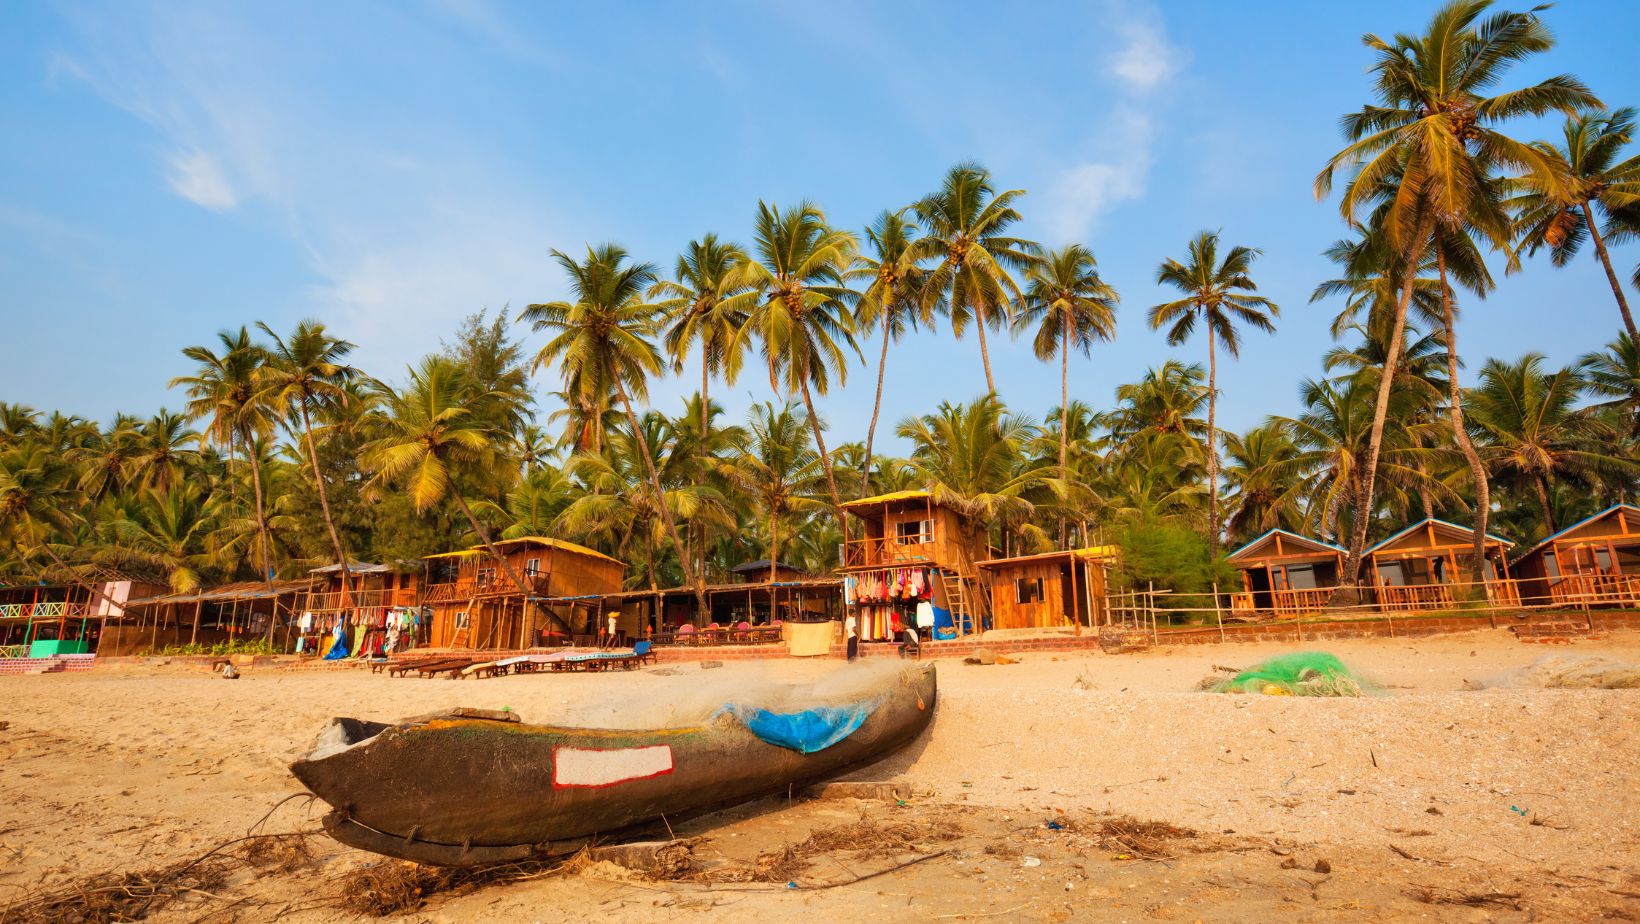 7 Places in Goa that are Gorgeous Backdrops for your Instagram Images